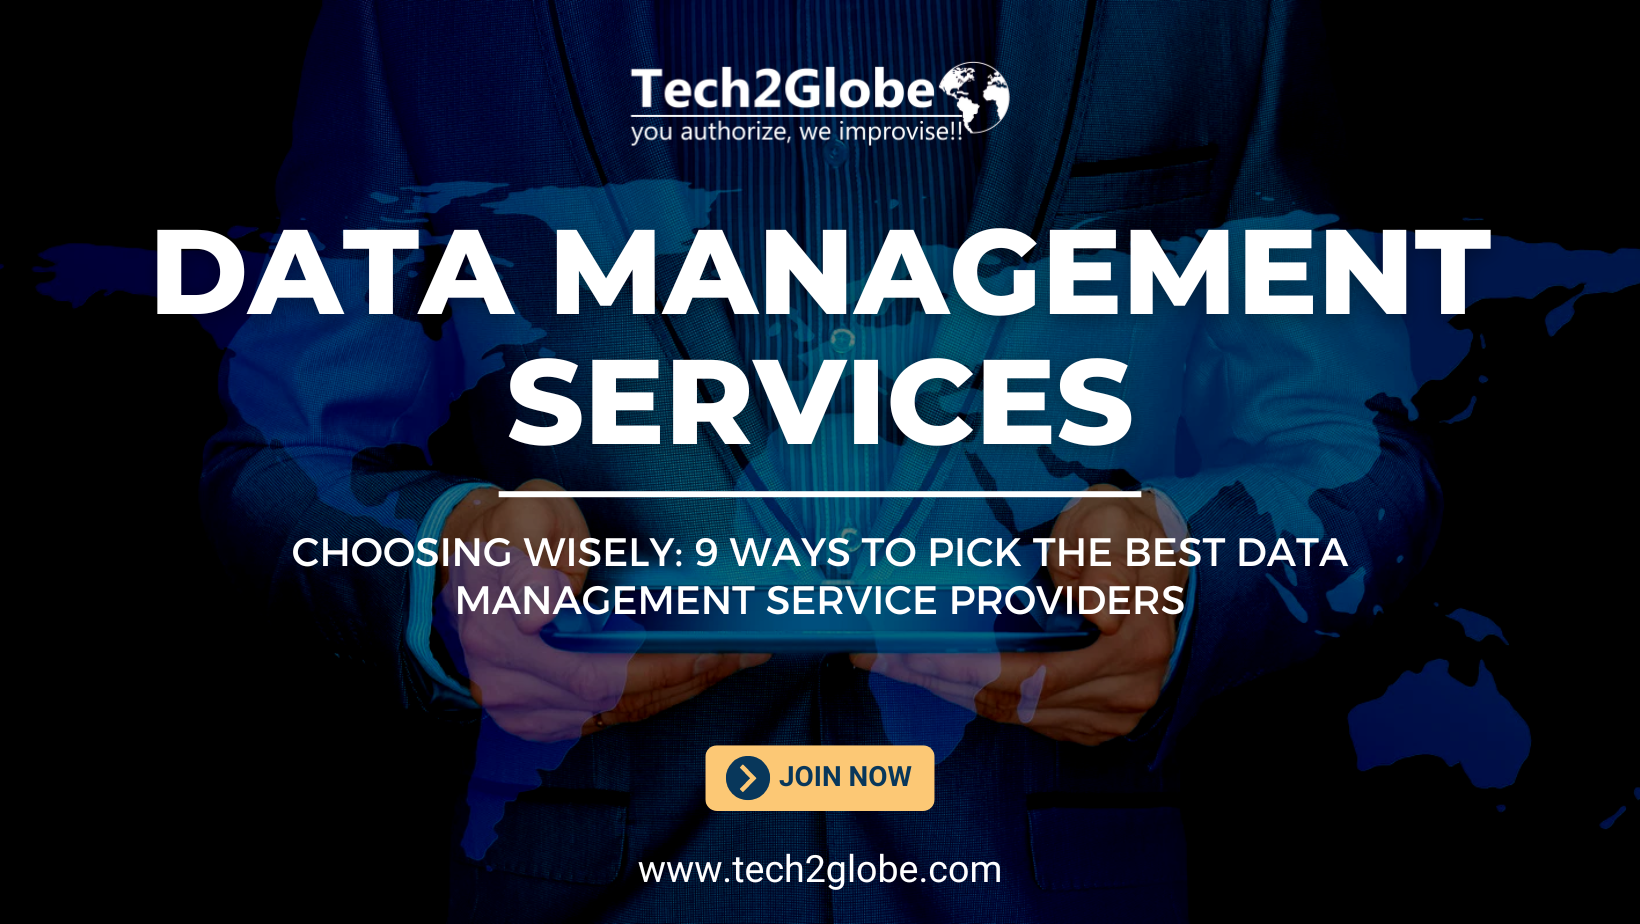 Choosing Wisely 9 Ways to Pick the Best Data Management Service Providers